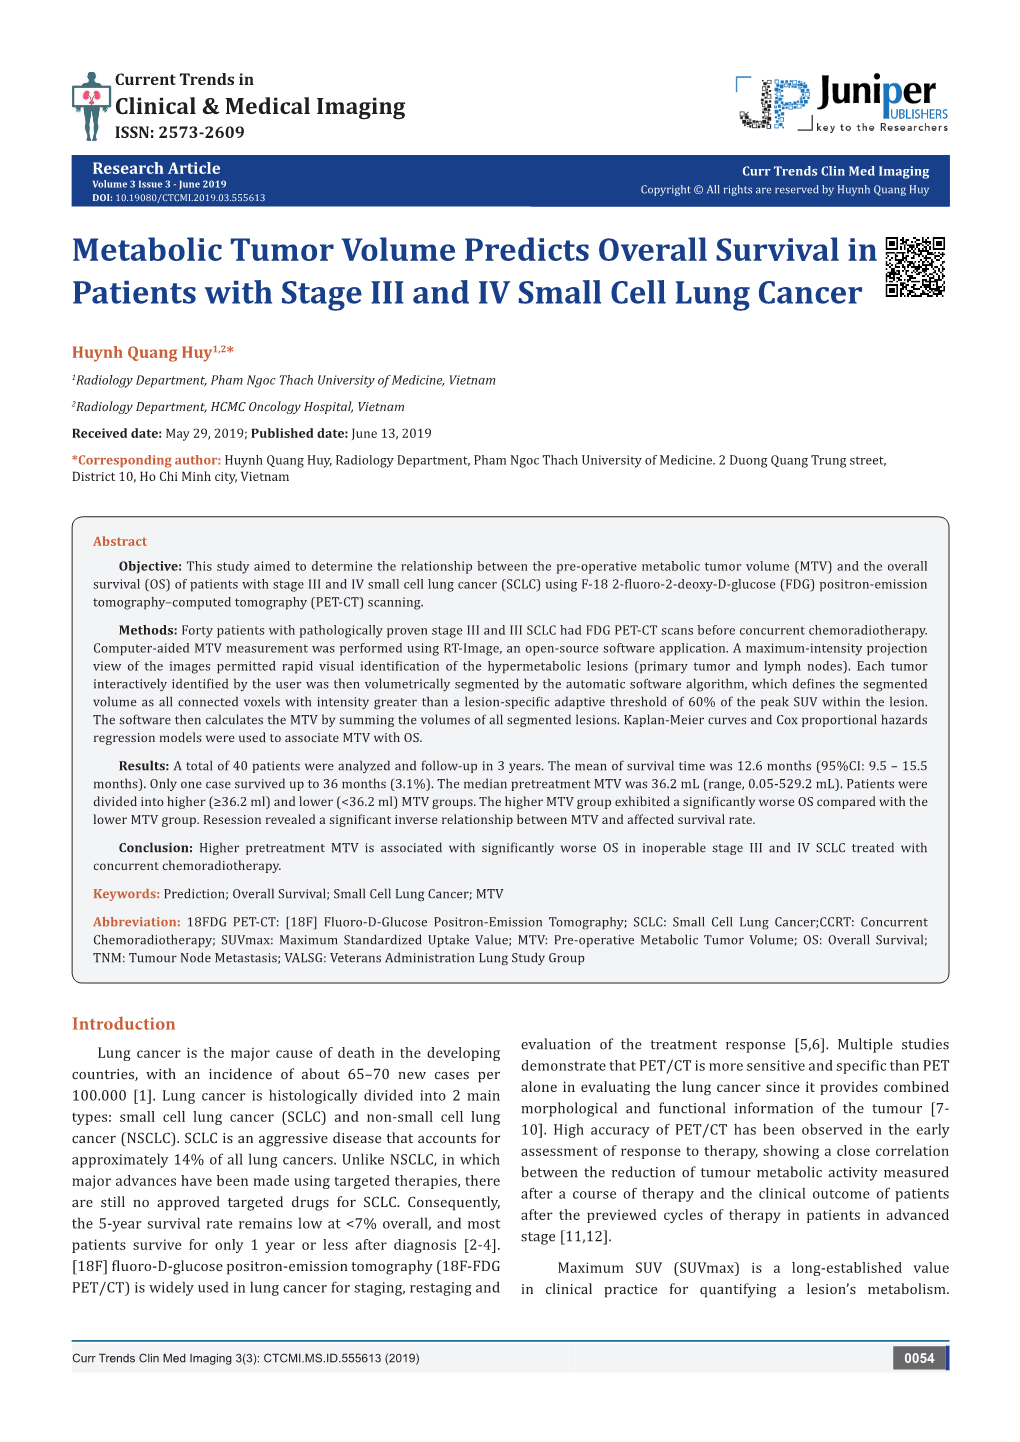 Metabolic Tumor Volume Predicts Overall Survival in Patients with Stage III and IV Small Cell Lung Cancer